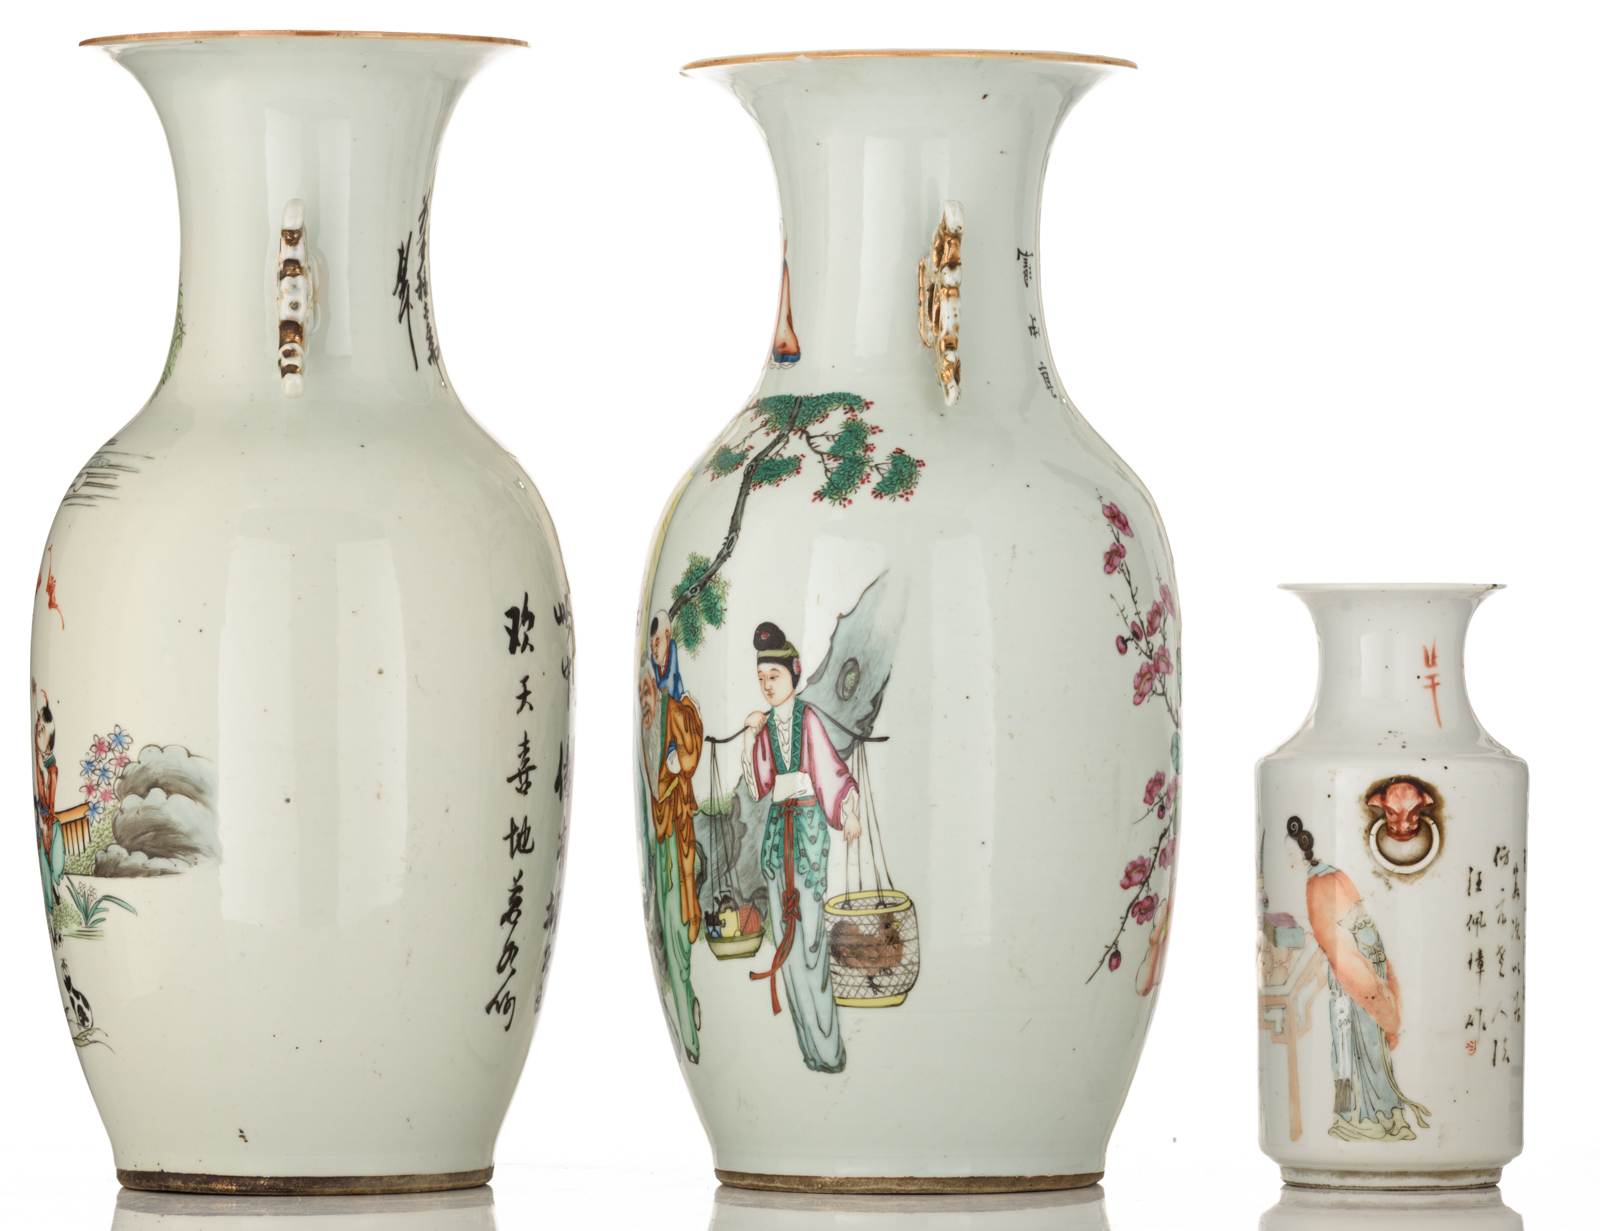 Two Chinese famille rose vases, decorated with figures, flowers and playing children, one vase doubl - Image 2 of 6